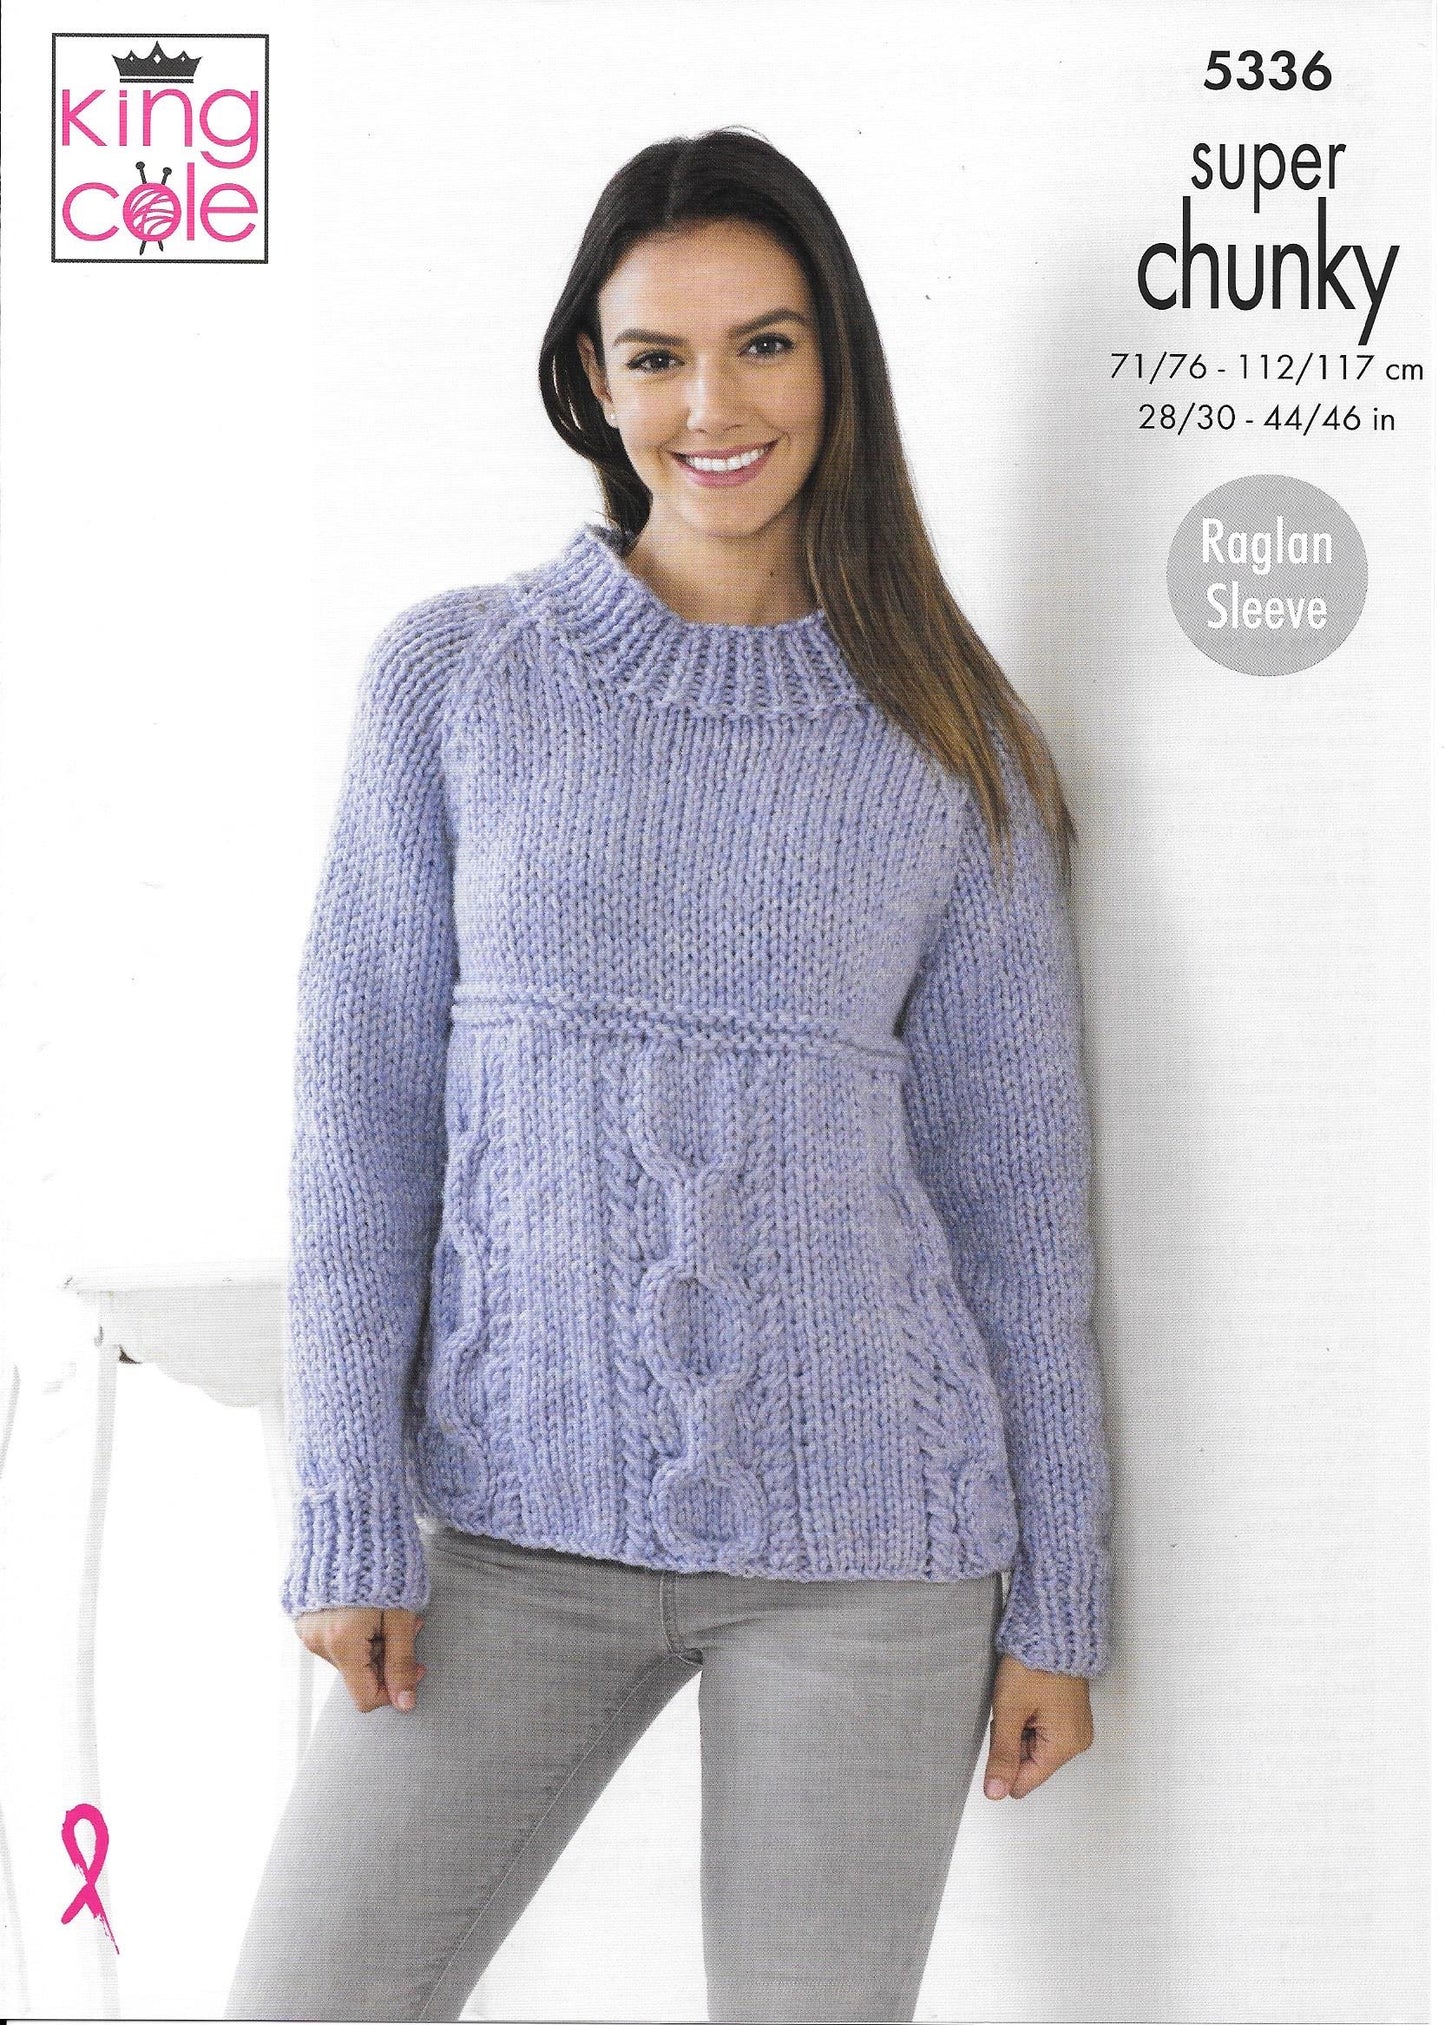 5336 King Cole Super chunky sweater and cardigan knitting pattern